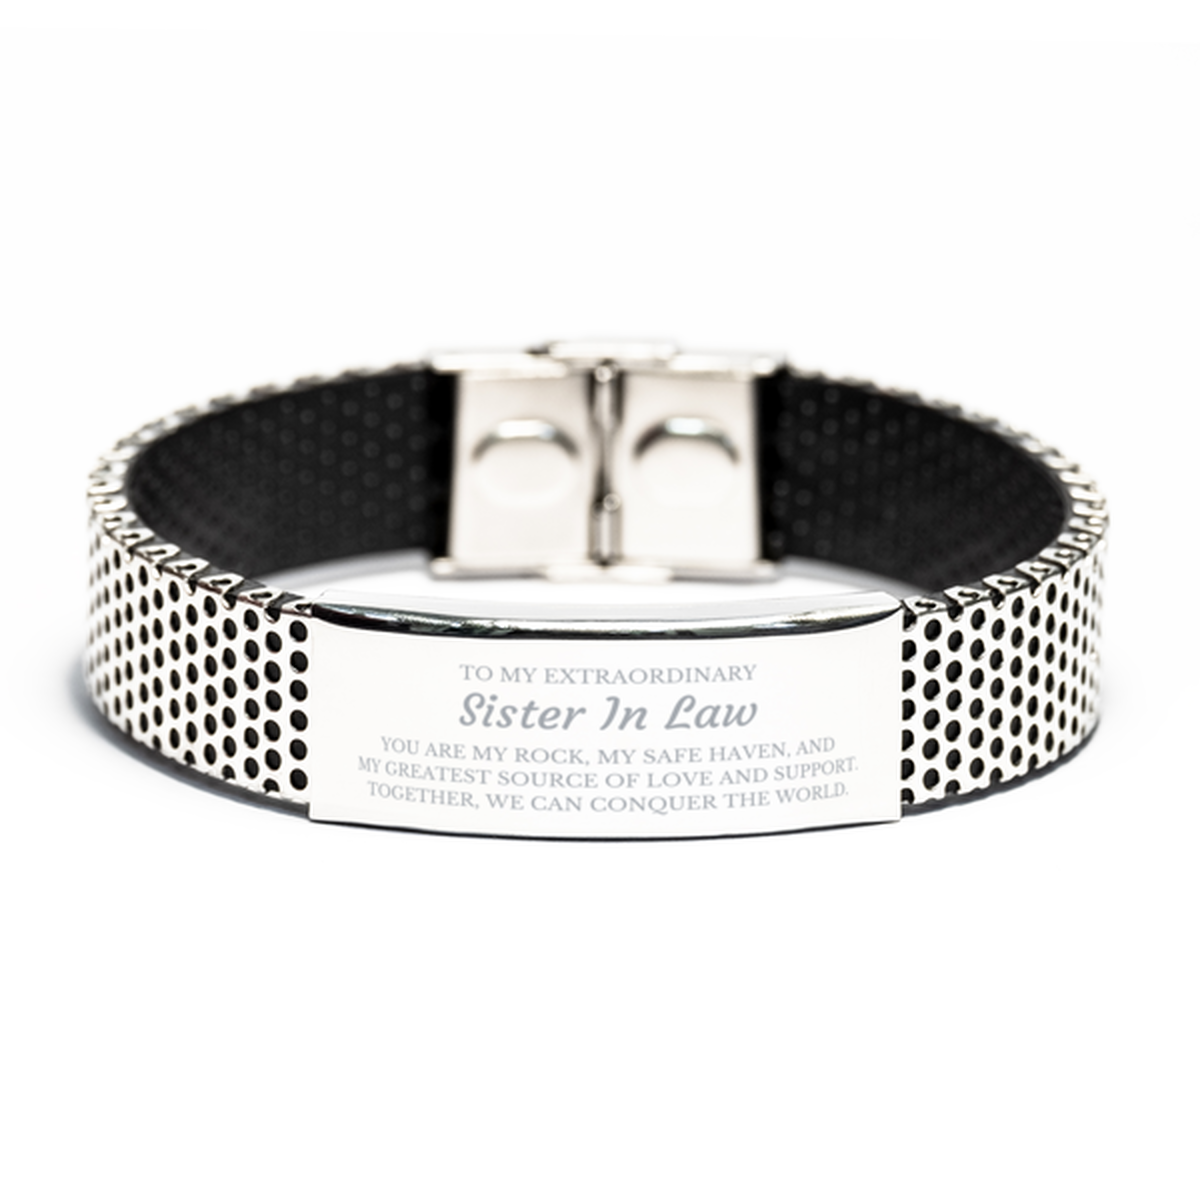 To My Extraordinary Sister In Law Gifts, Together, we can conquer the world, Birthday Stainless Steel Bracelet For Sister In Law, Christmas Gifts For Sister In Law